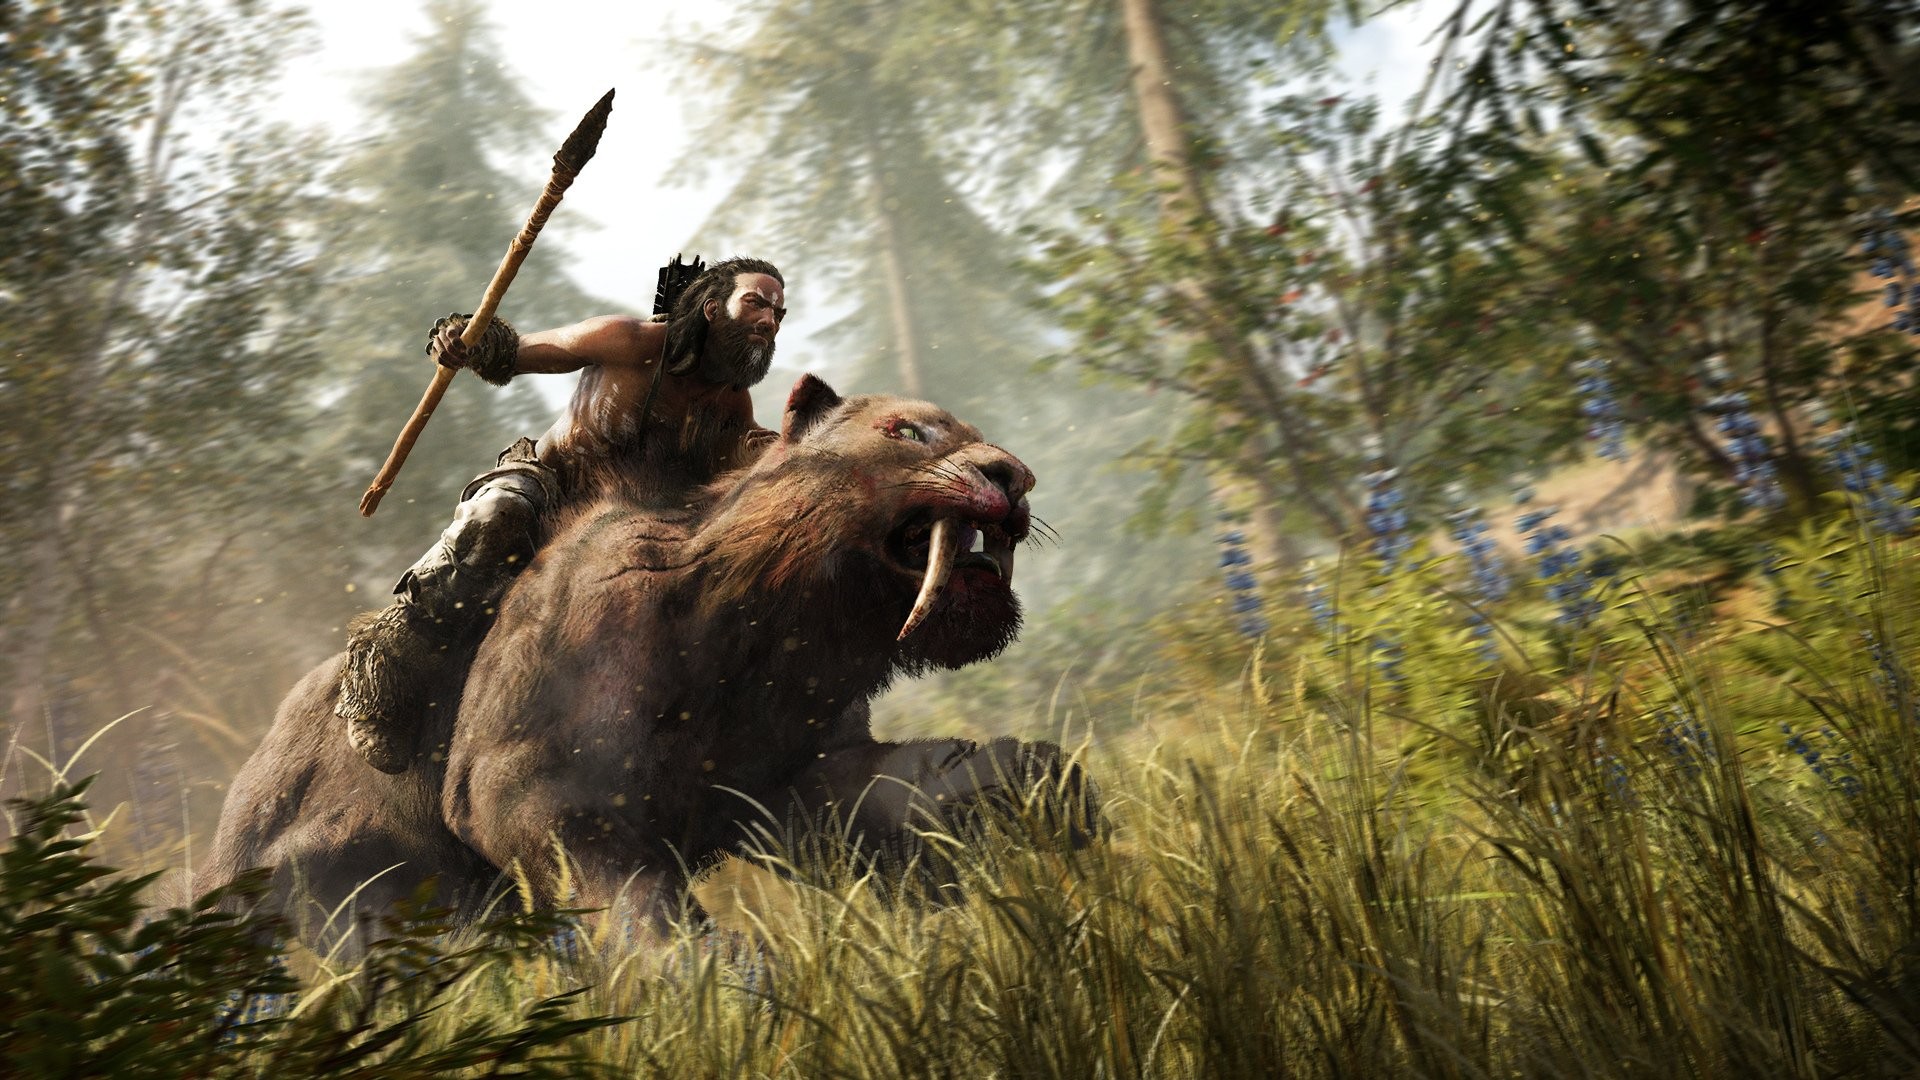 General 1920x1080 far cry primal video games video game art animals Ubisoft 2016 (year) PC gaming spear men creature